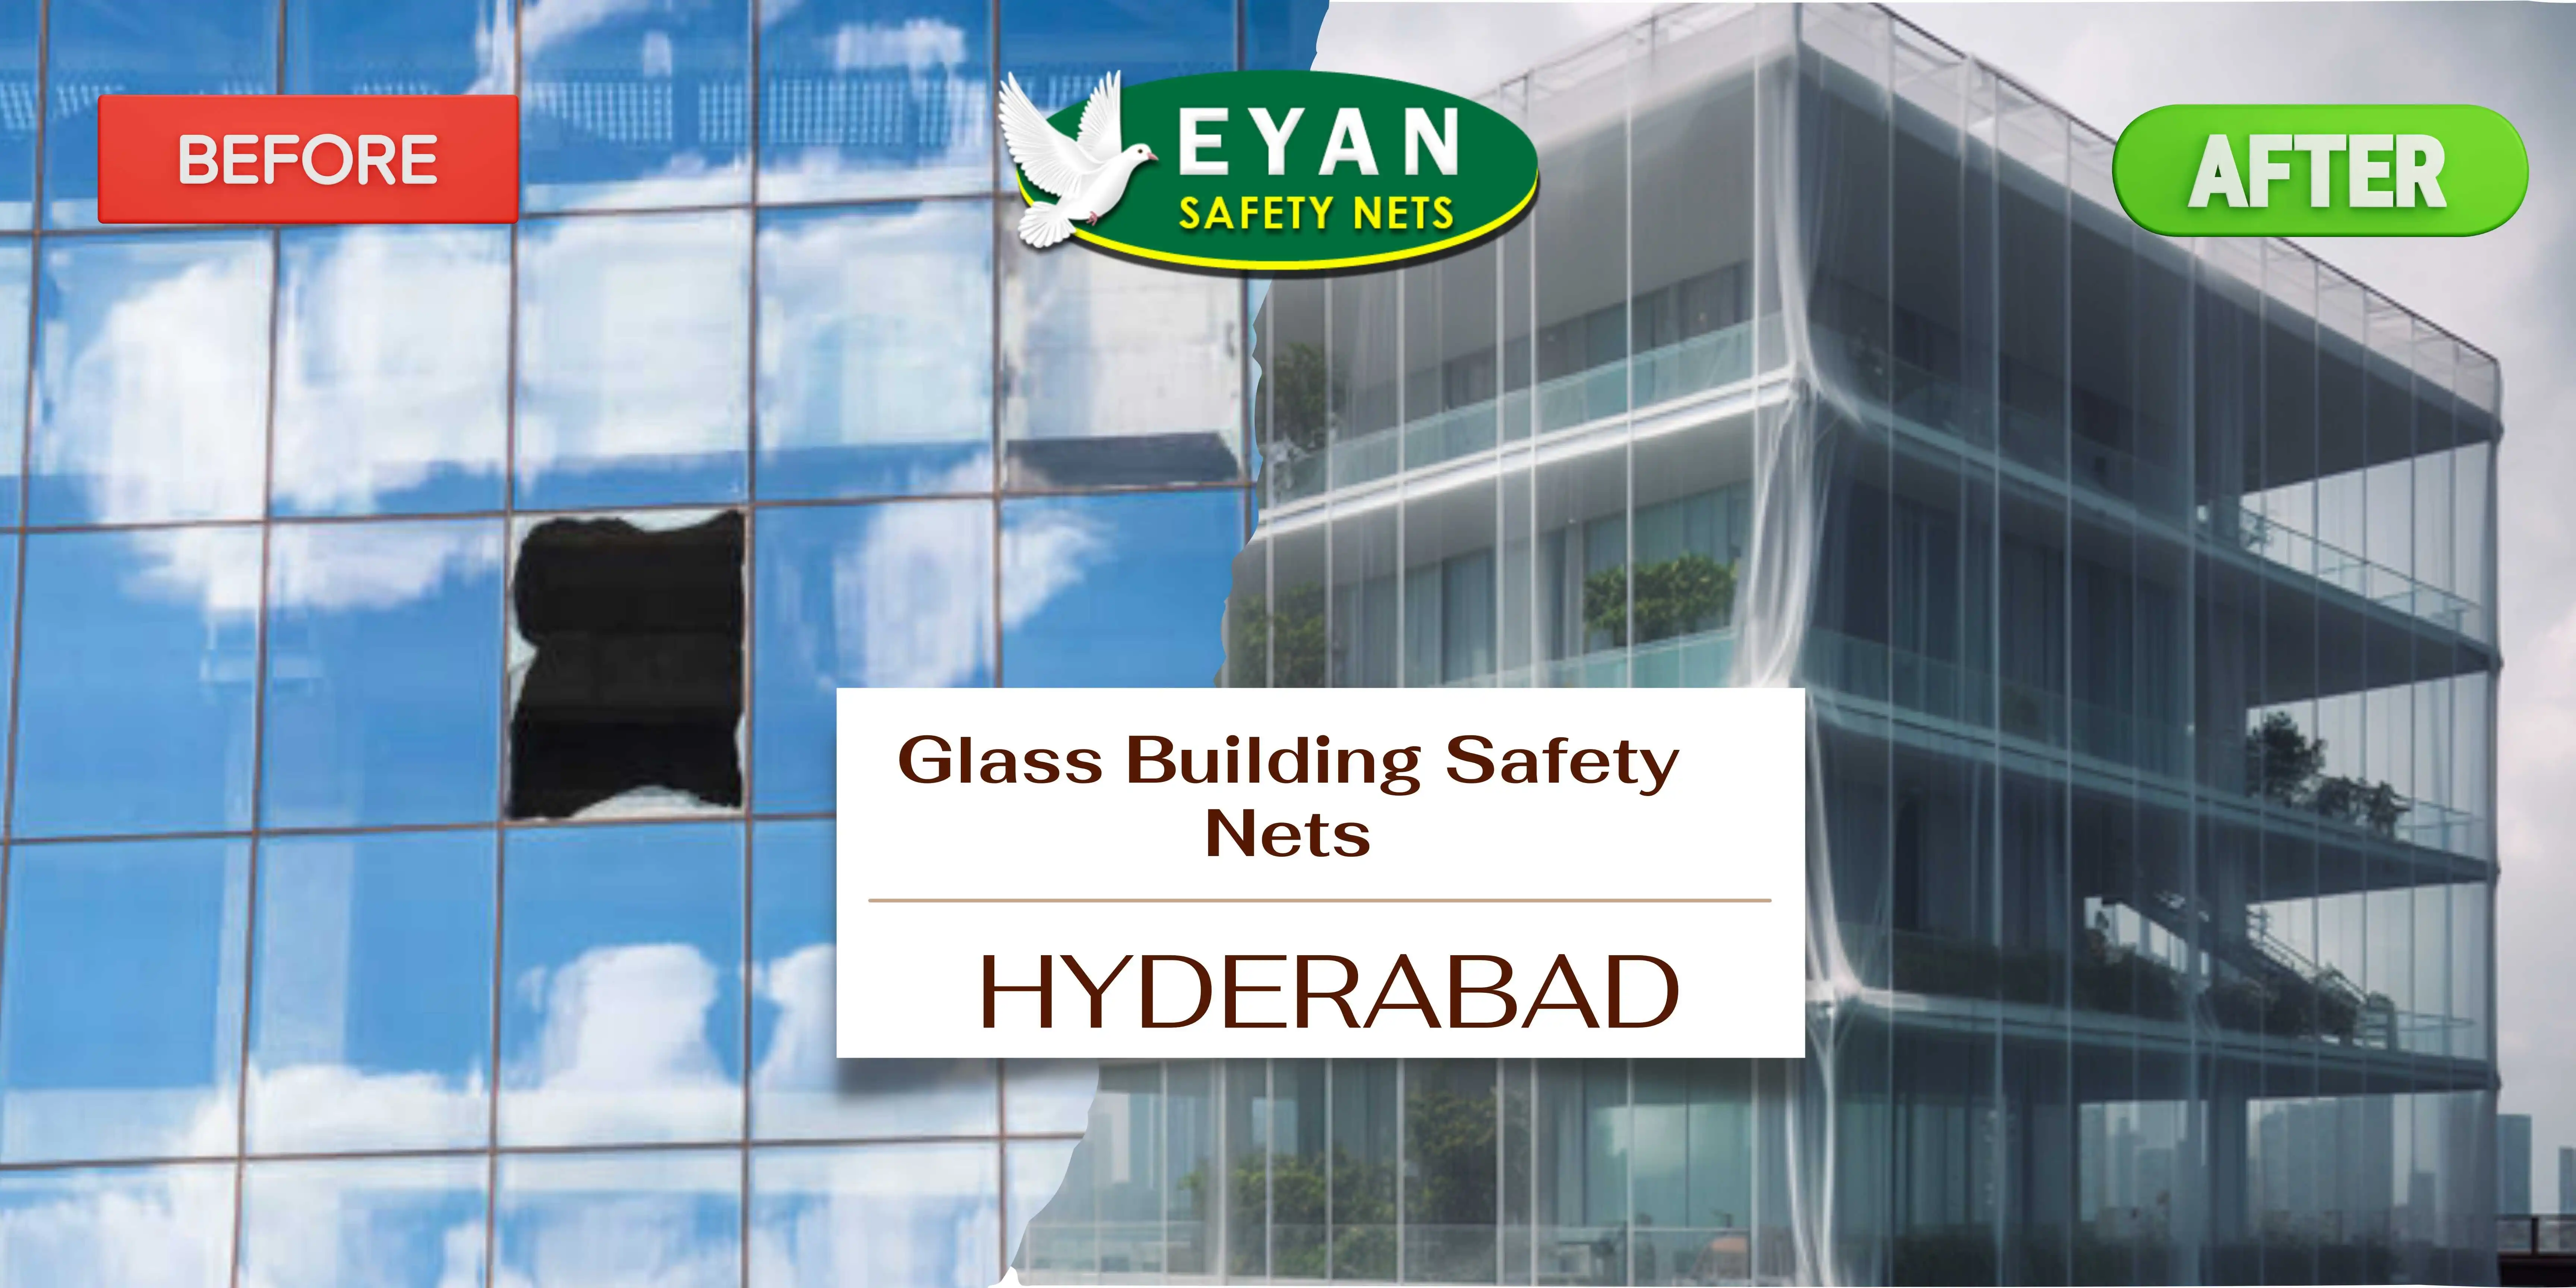 nets-installed-over-the-glass-building-for-safety